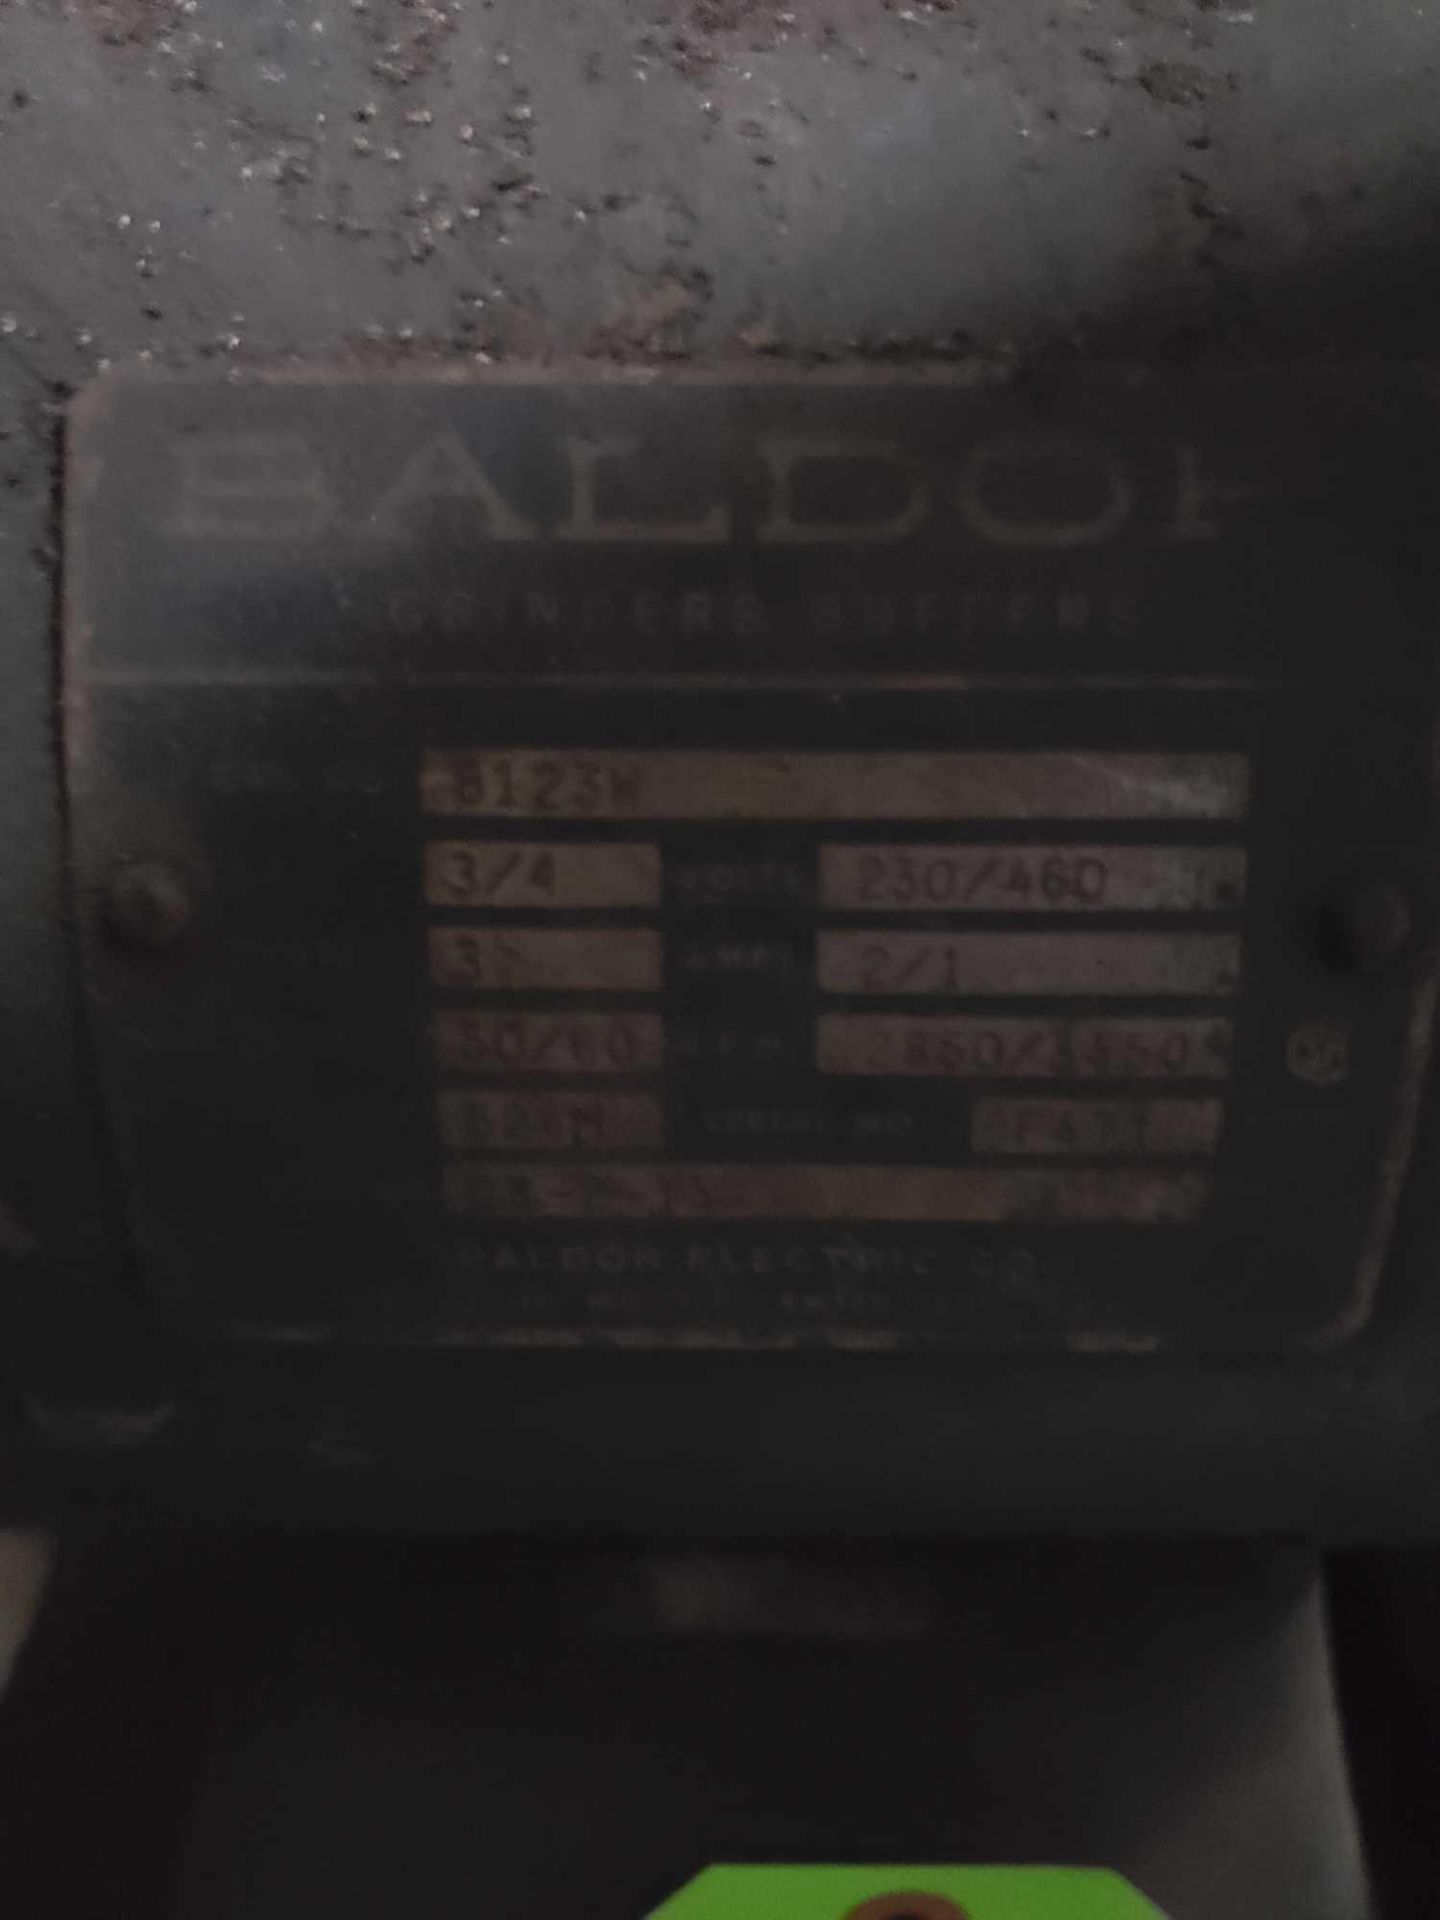 Baldor double end grinder. 3/4hp 3 phase, with stand. - Image 2 of 2